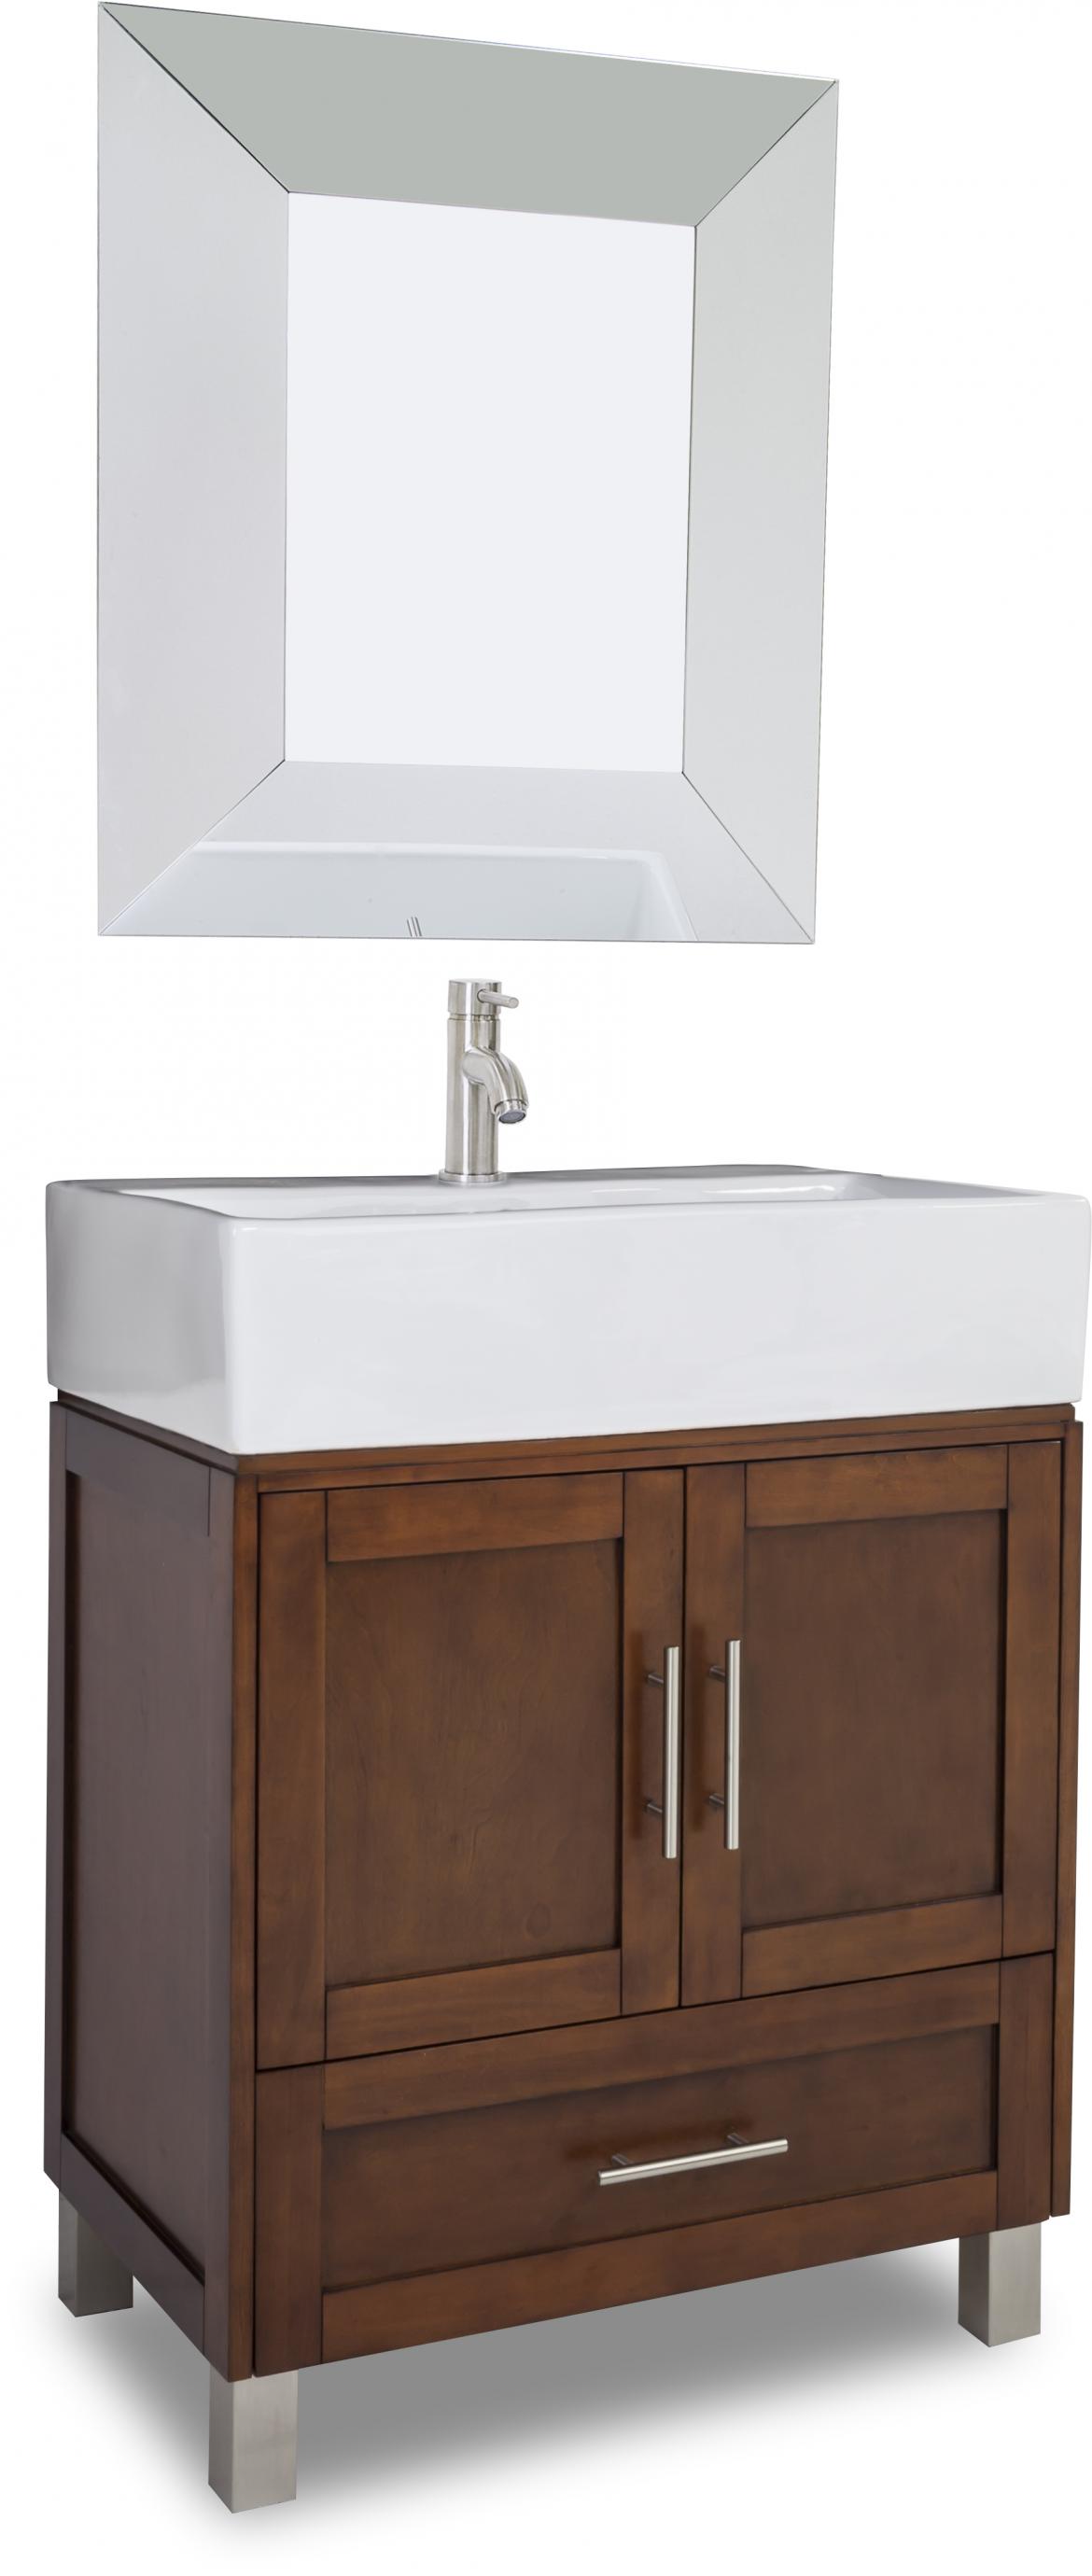 Part of the Jeffrey Alexander collection, the York Vessel vanity features a large two-door cabinet and bottom drawer for storage. It measures 28 inches wide, 18¼ inches deep, and 36 inches tall. The product comes with an oversized vessel bowl/top cut for a single-hole faucet, coordinating glass mirror, and satin nickel hardware. It is available in chocolate and espresso finishes.